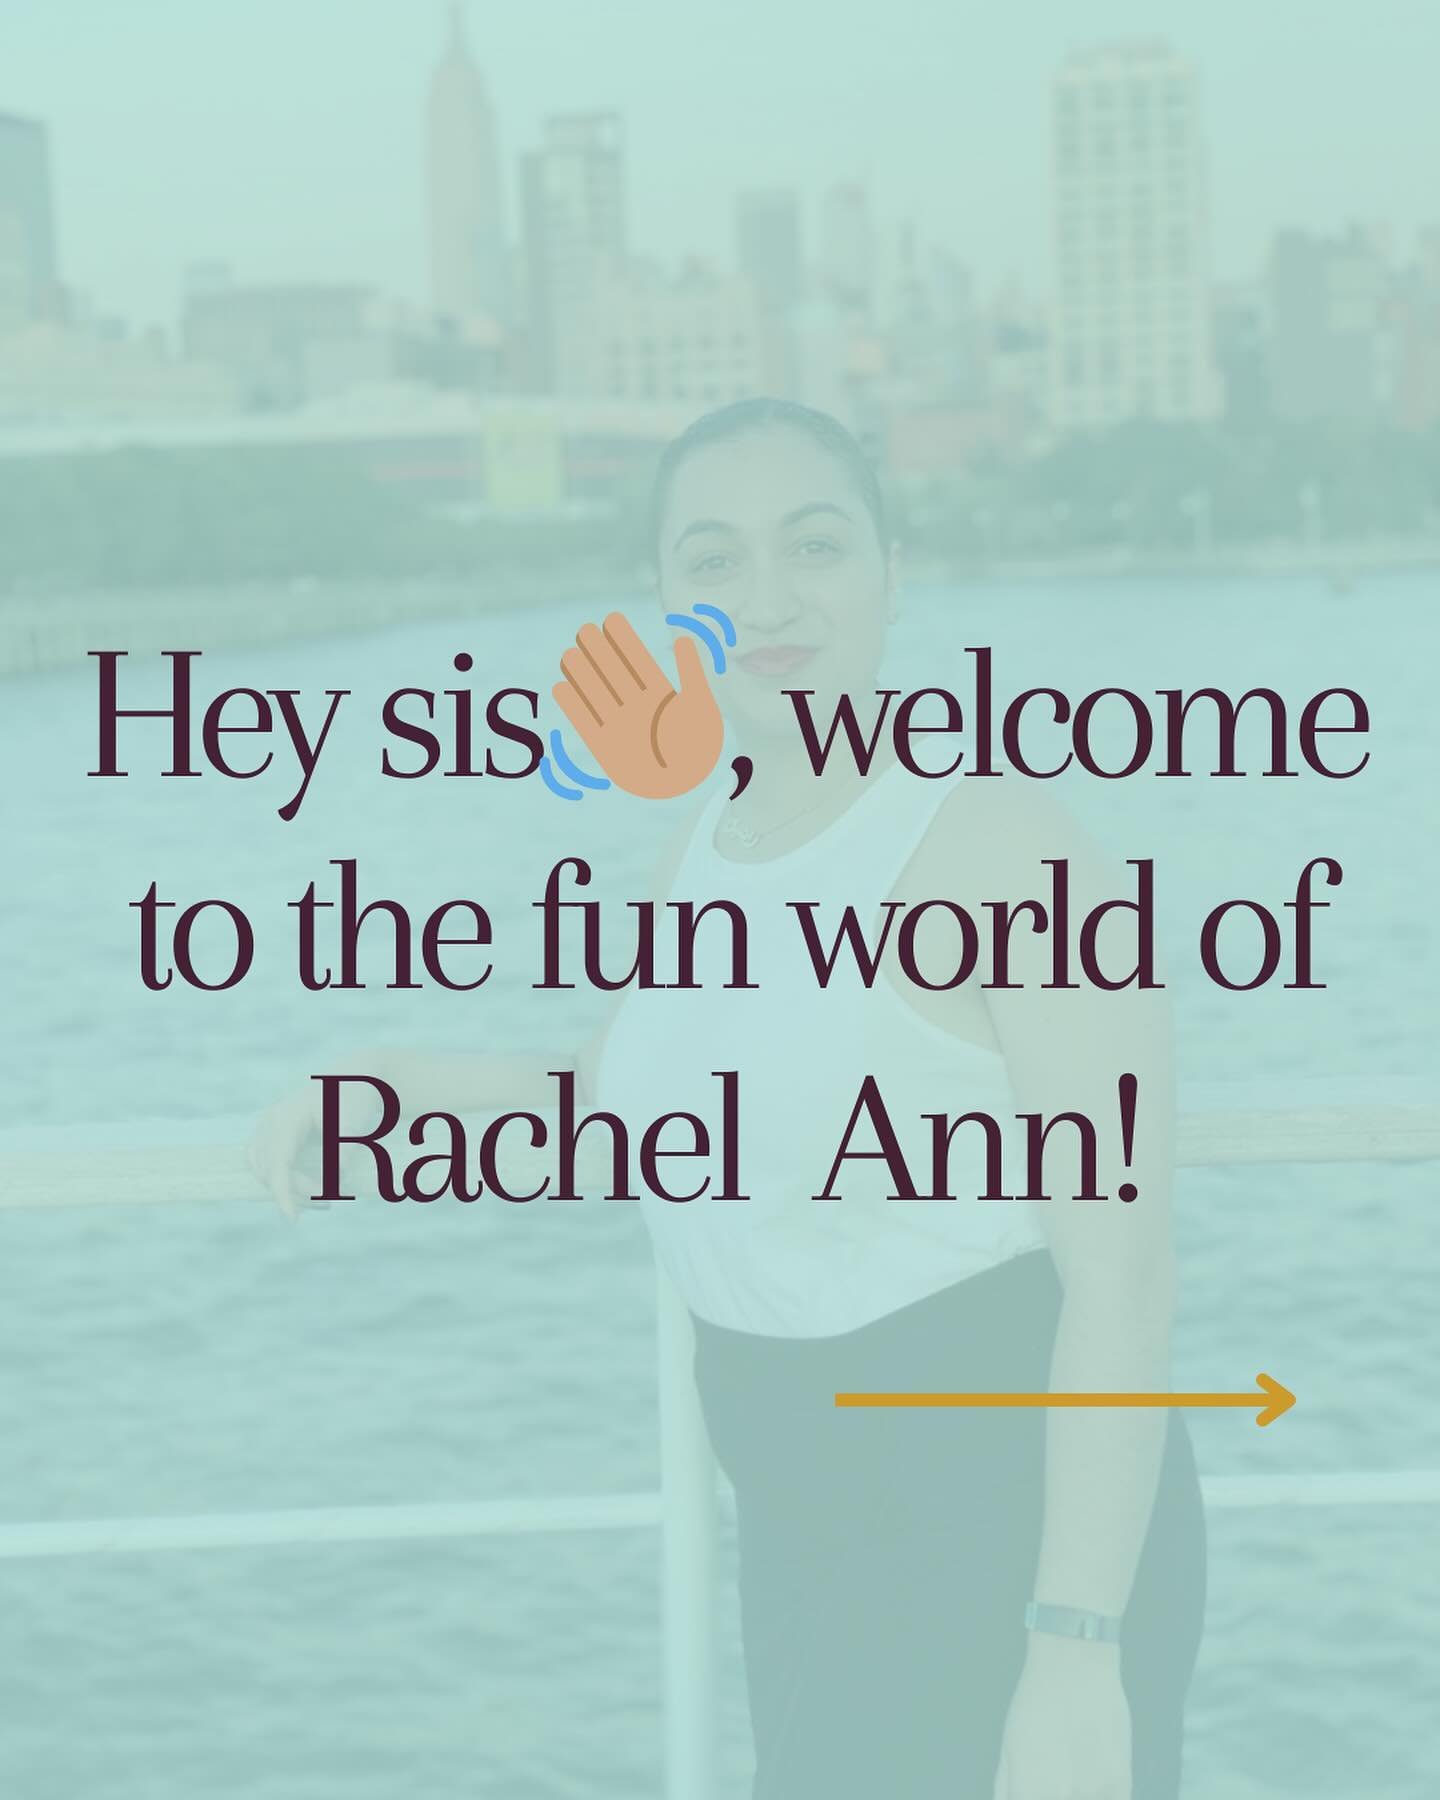 Hey sis👋🏽, welcome to the fun world of Rachel Ann!

☀️I&rsquo;m a Christian holistic life coach, who loves to remind Christian women of color of their worth.👏🏽 I support my clients to where they wanna be in life by getting real with God, themselv